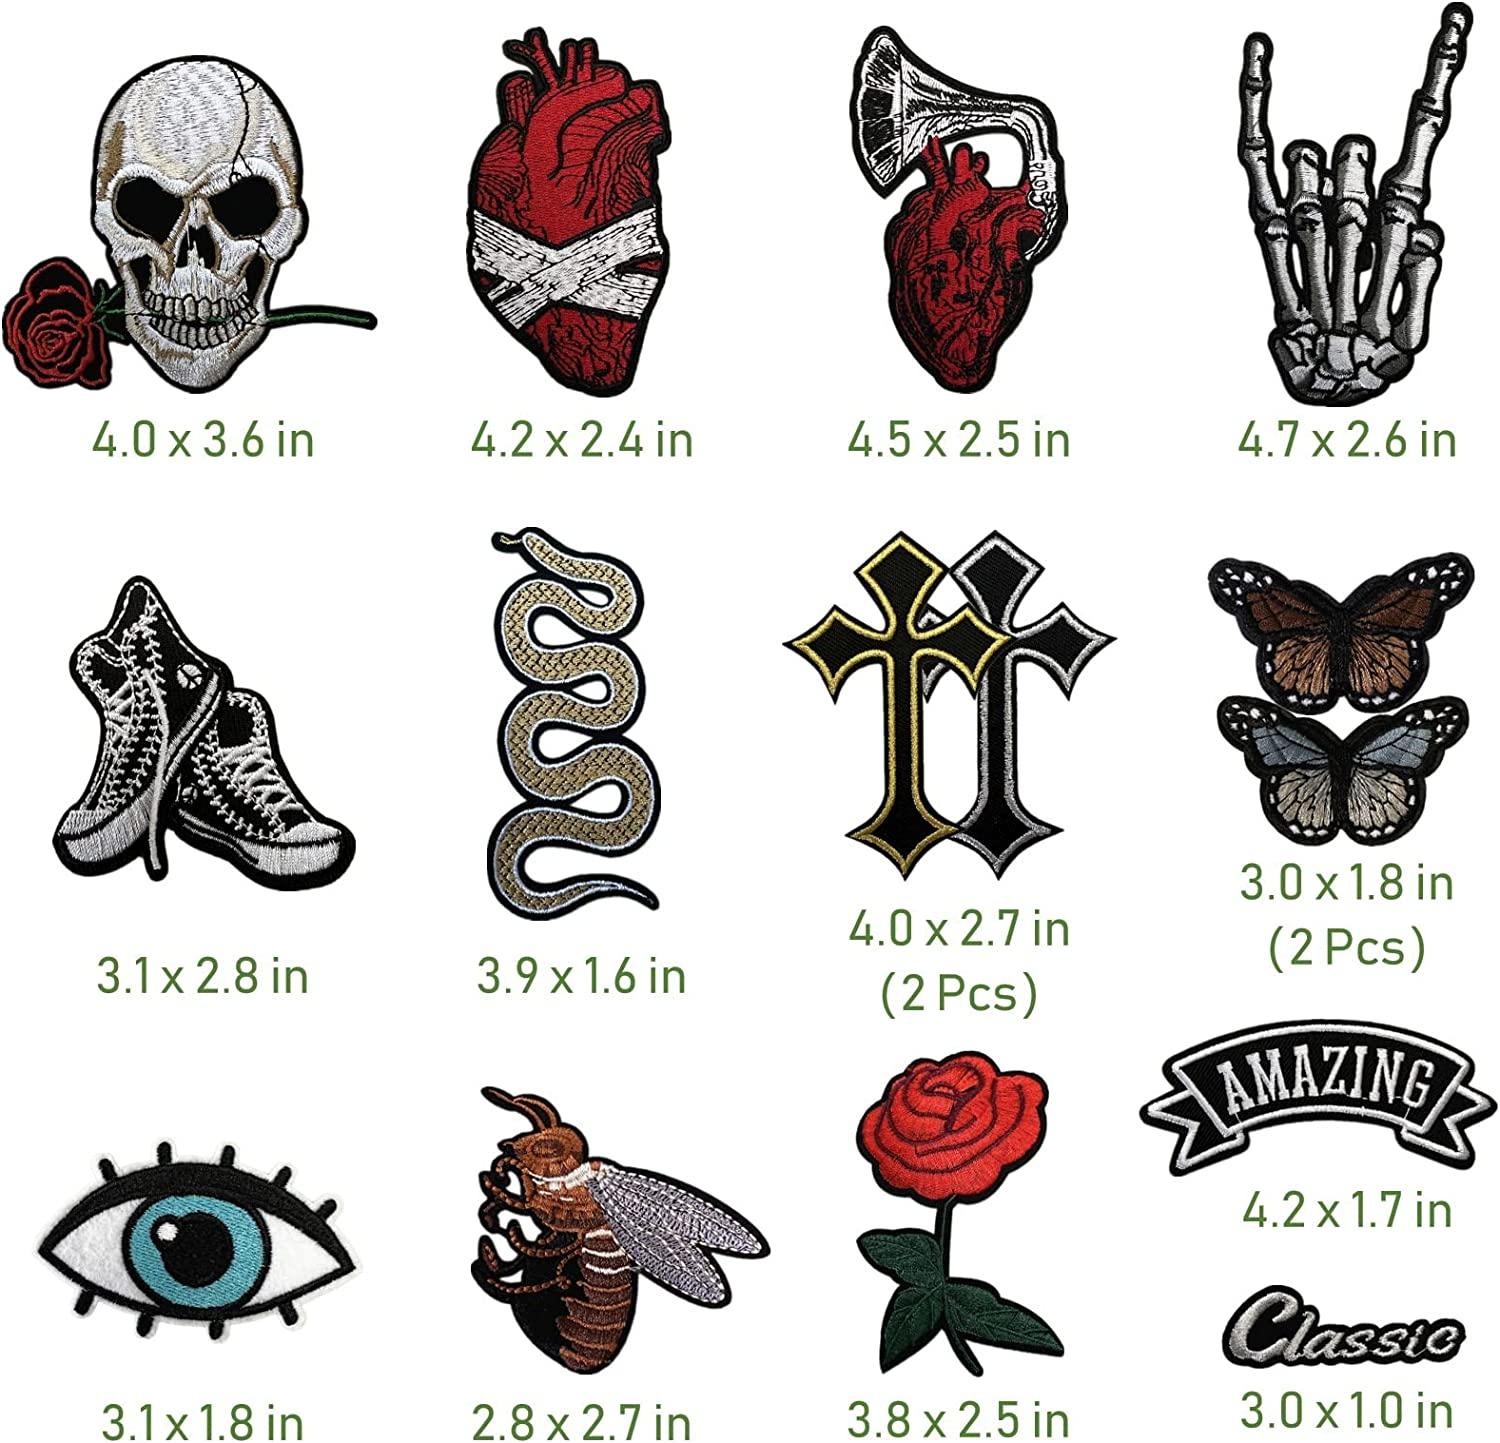 Dark Embroidered Applique Iron On Patches for Backpacks, Rock Band